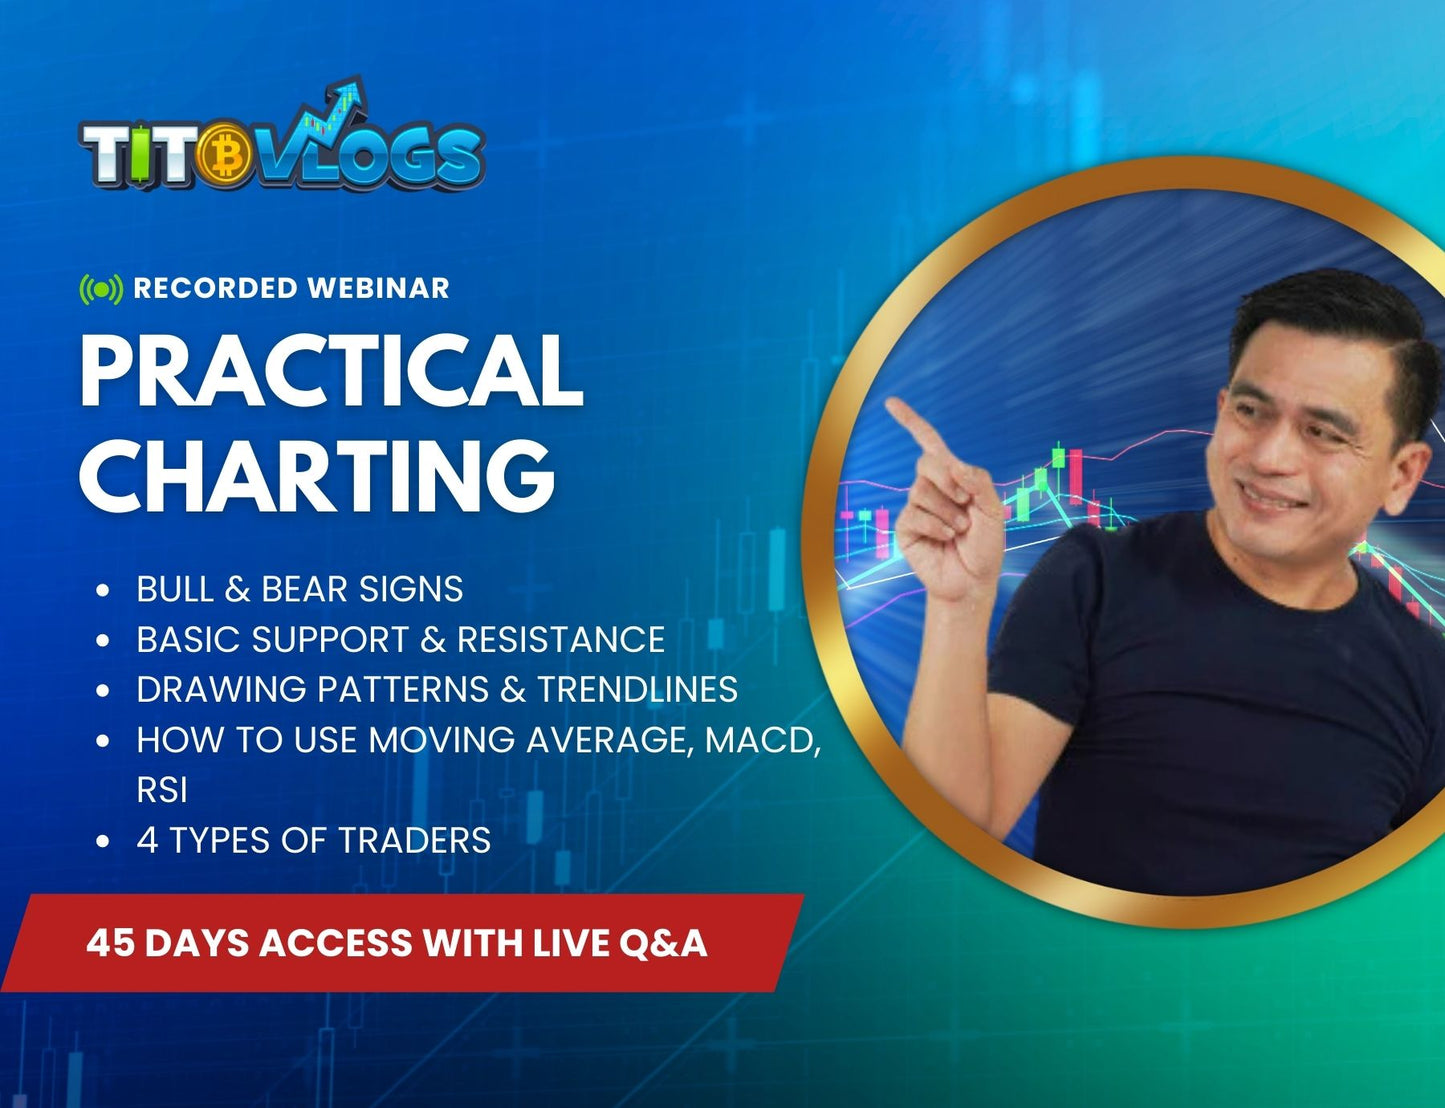 Practical Charting: Charting Made Easy!